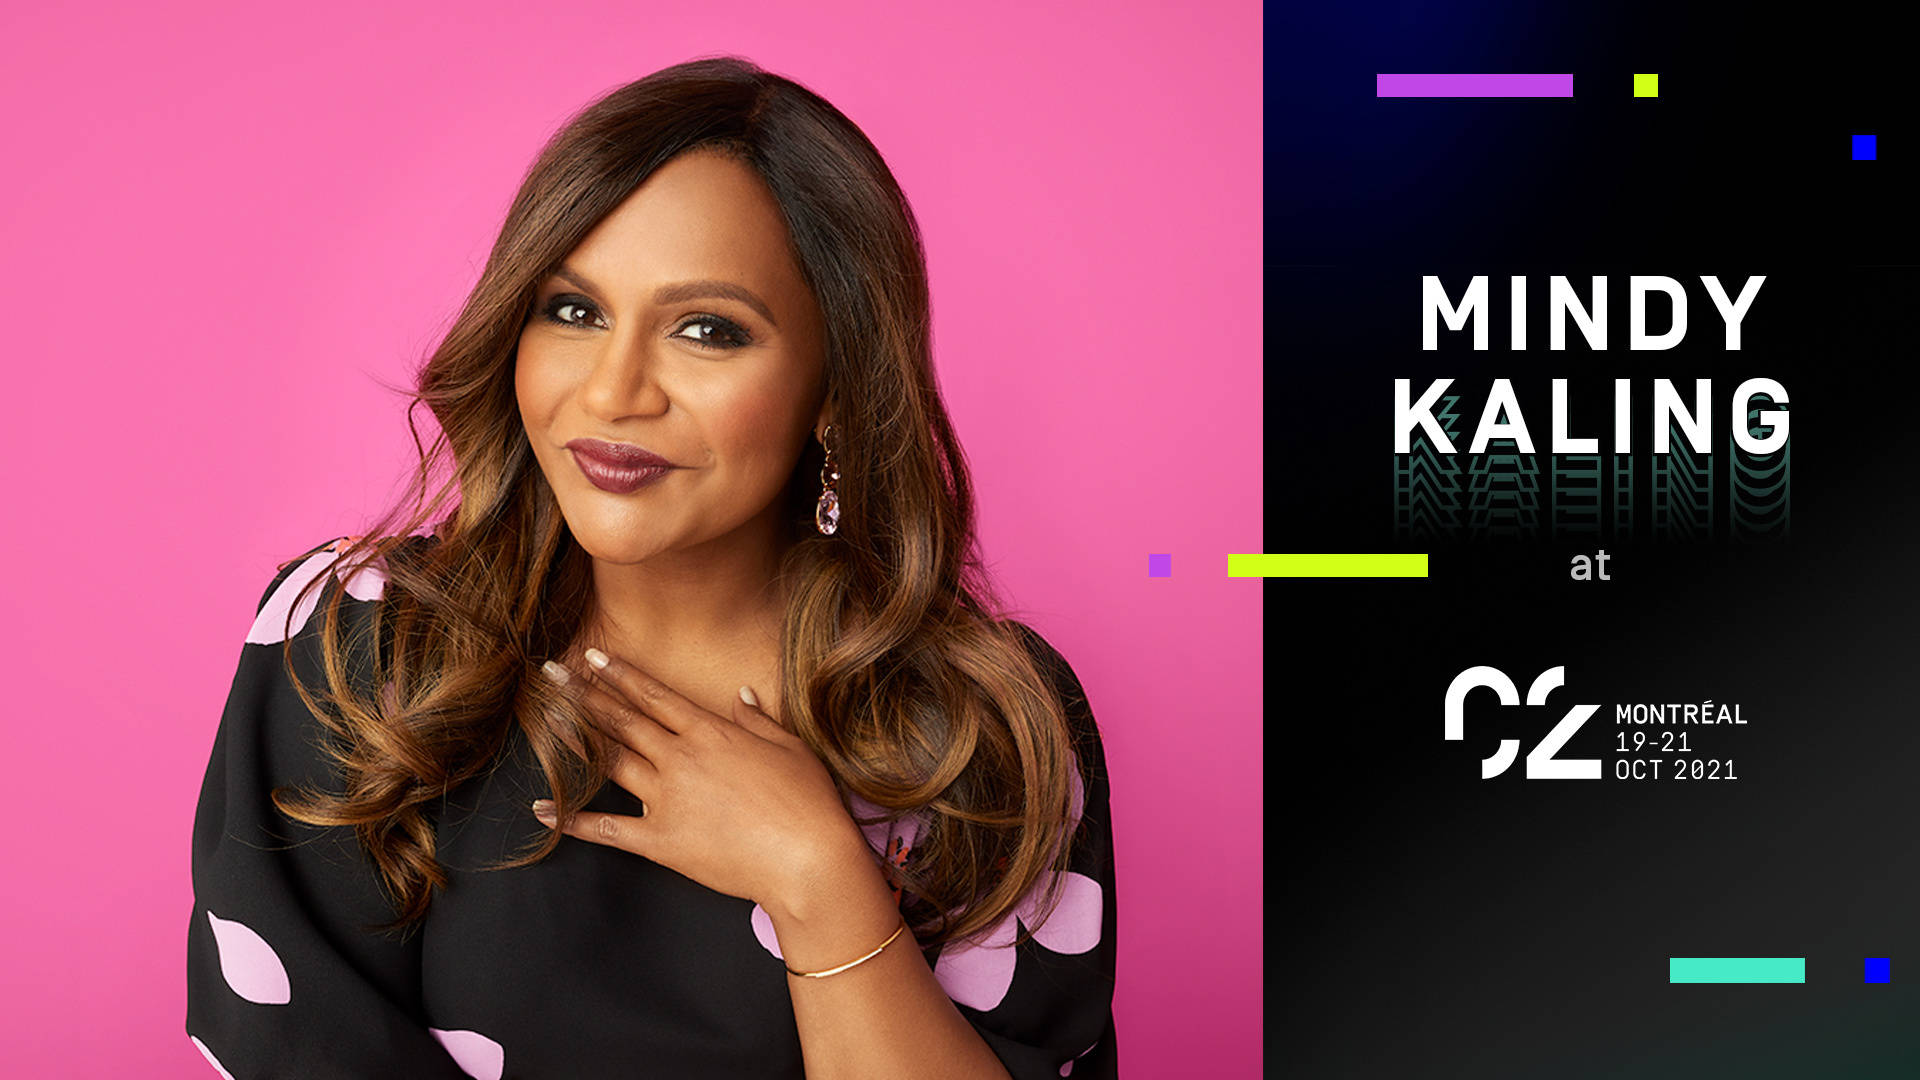 Mindy Kaling Smiling At The Montreal Event 2021